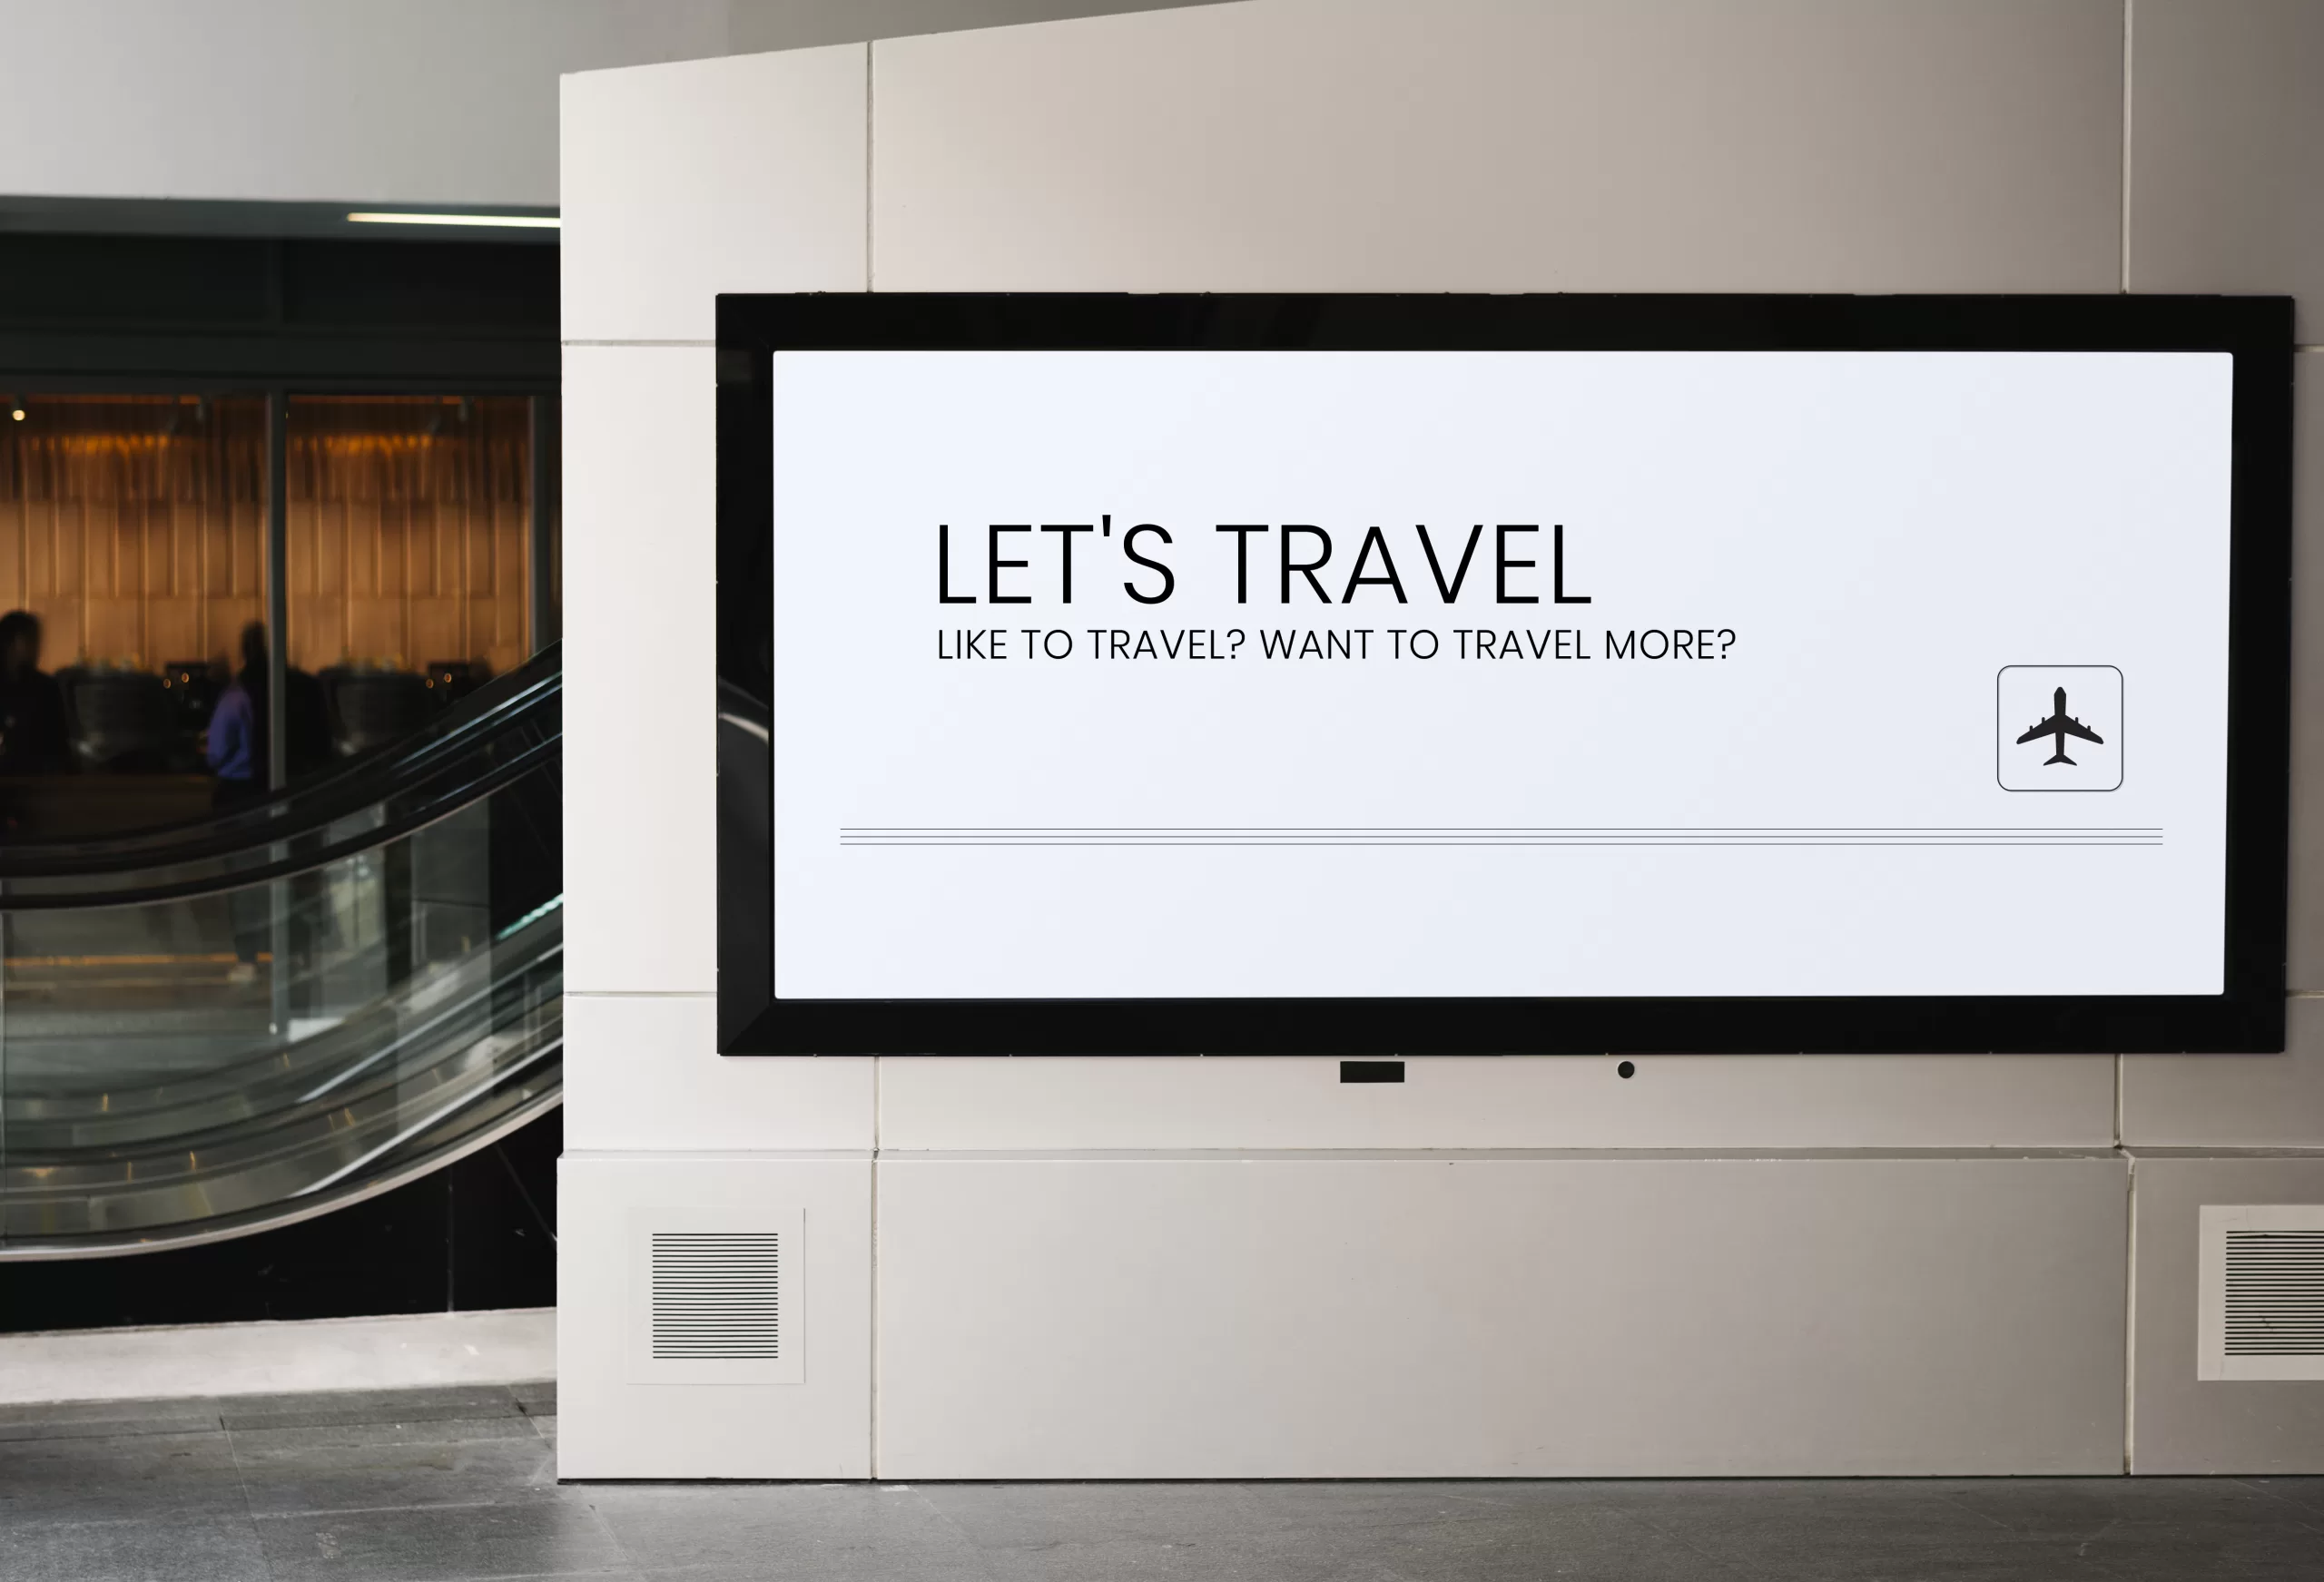 Dubai Airport Advertising: Reach Travellers with Your Brand